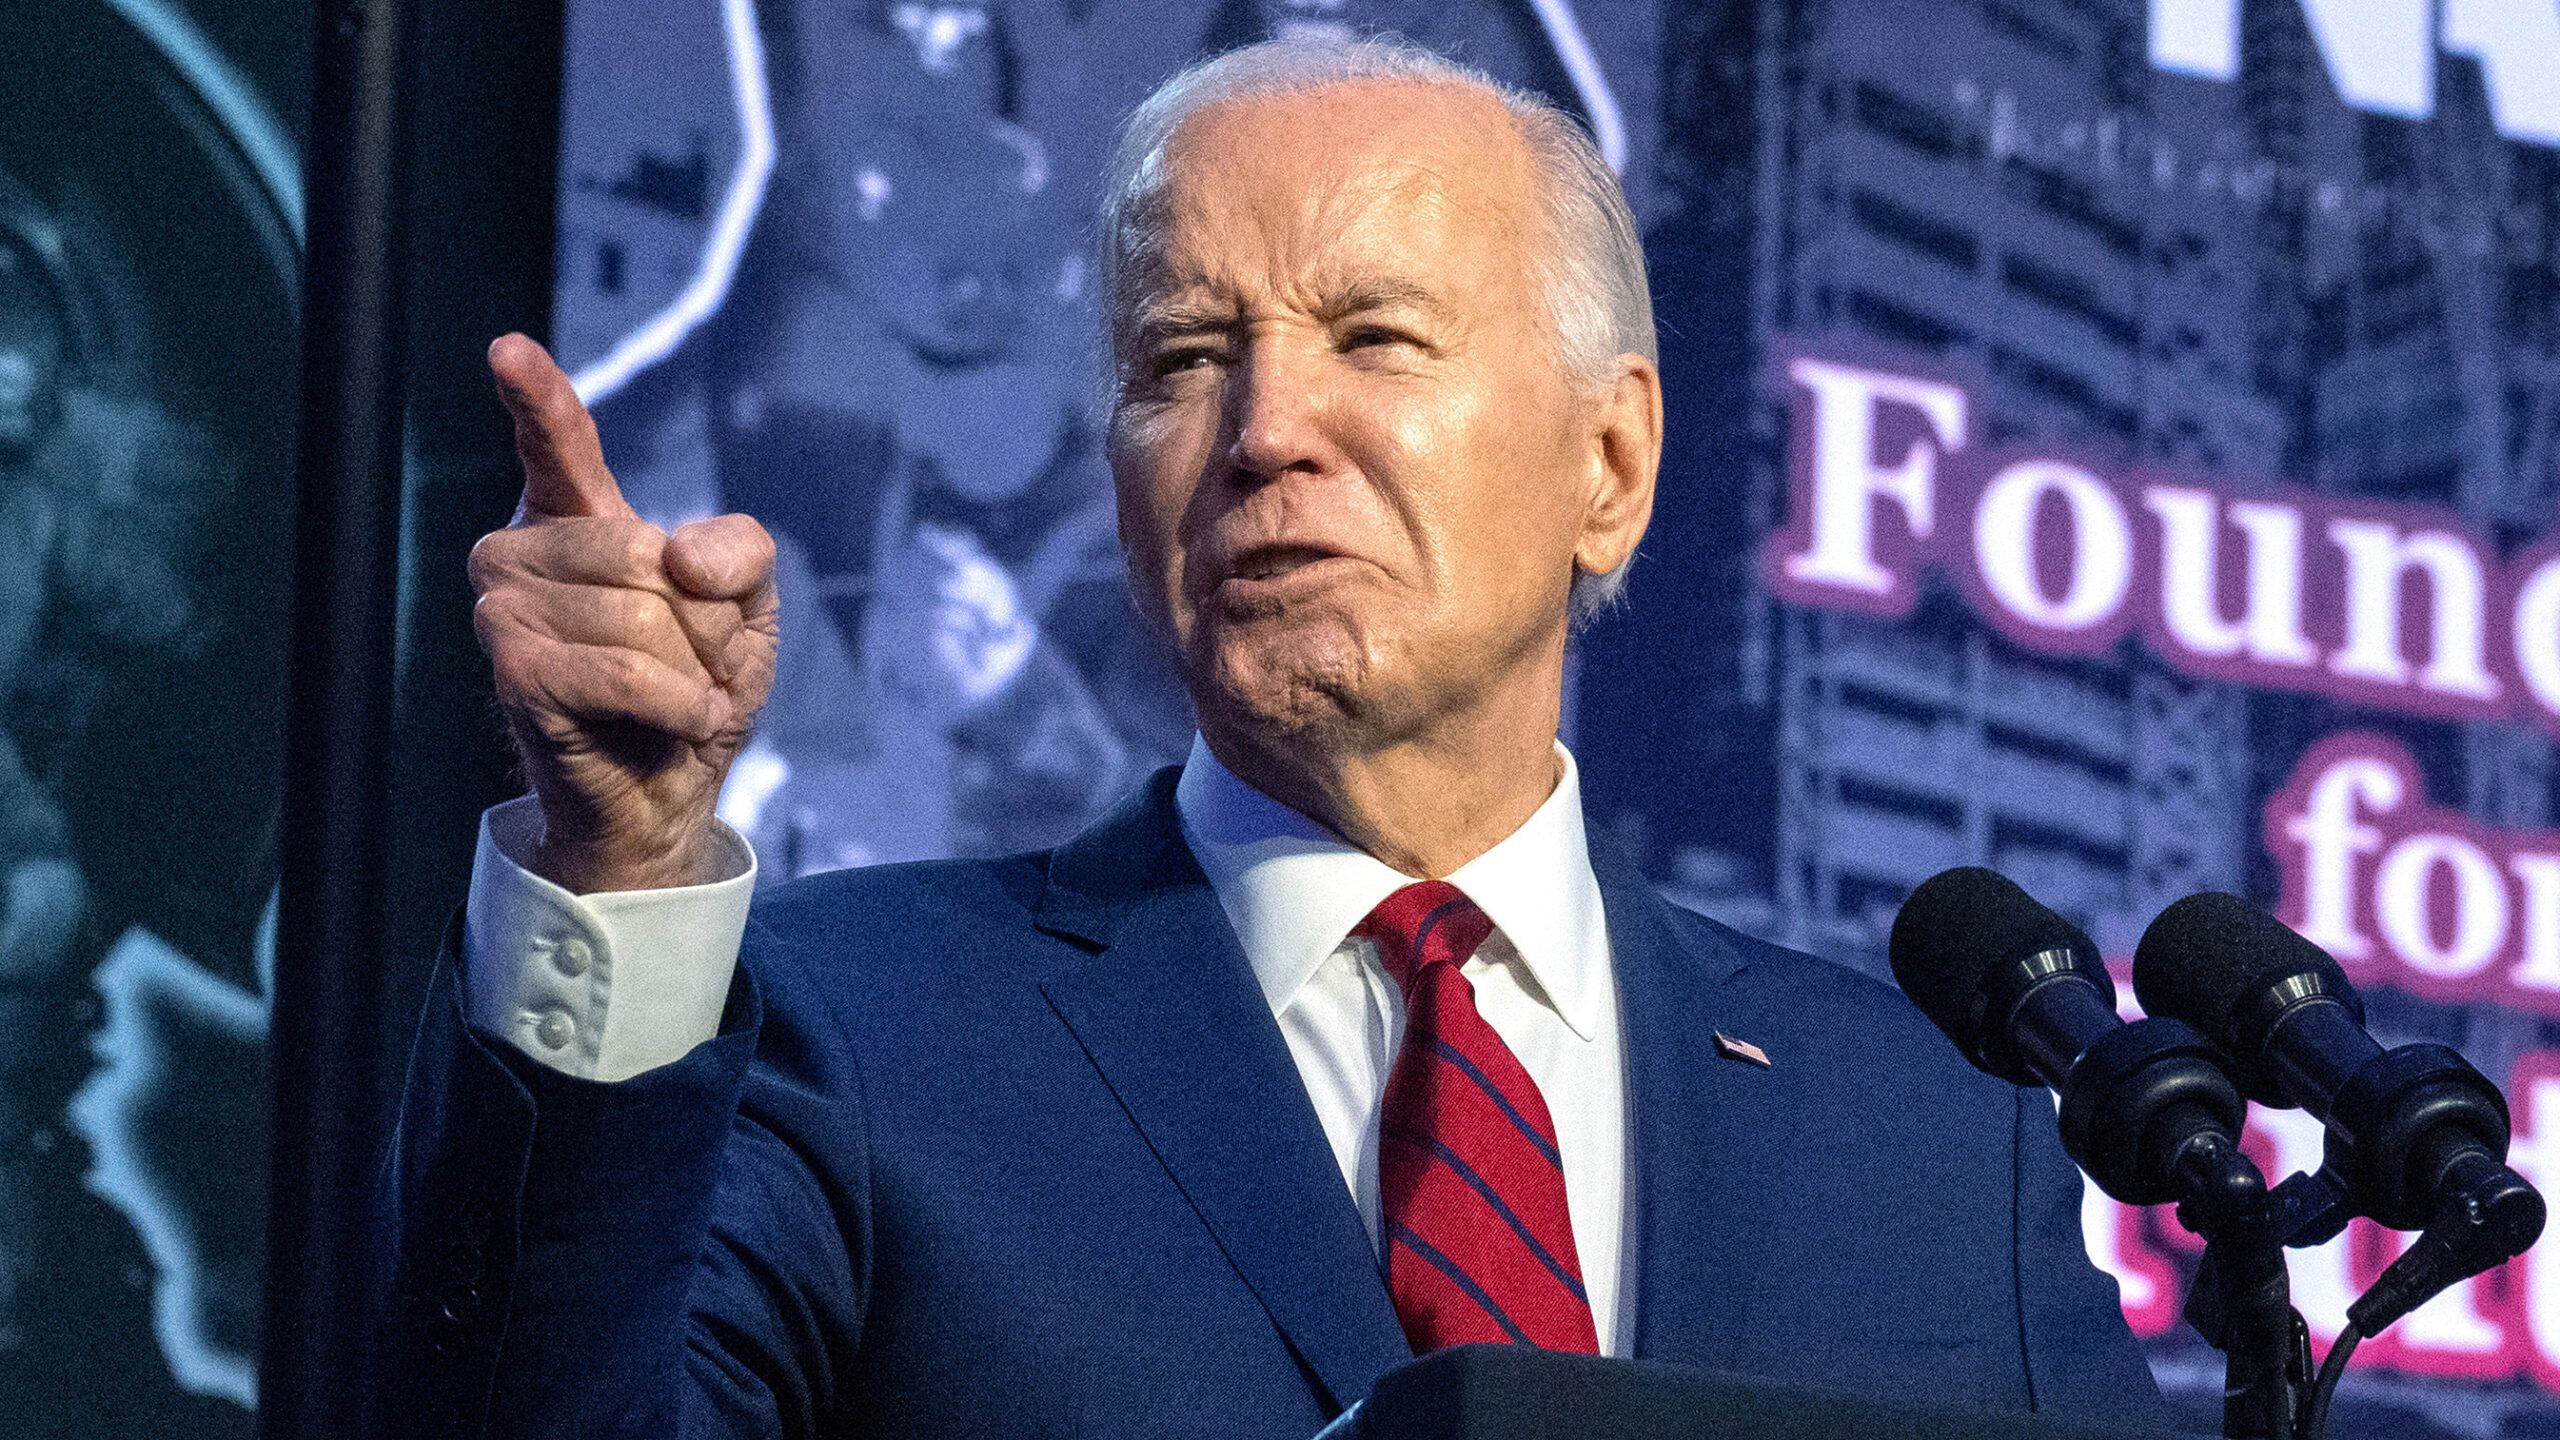 Biden Signals Tax Hike If Re-Elected As Americans Struggle From His Inflation Crisis